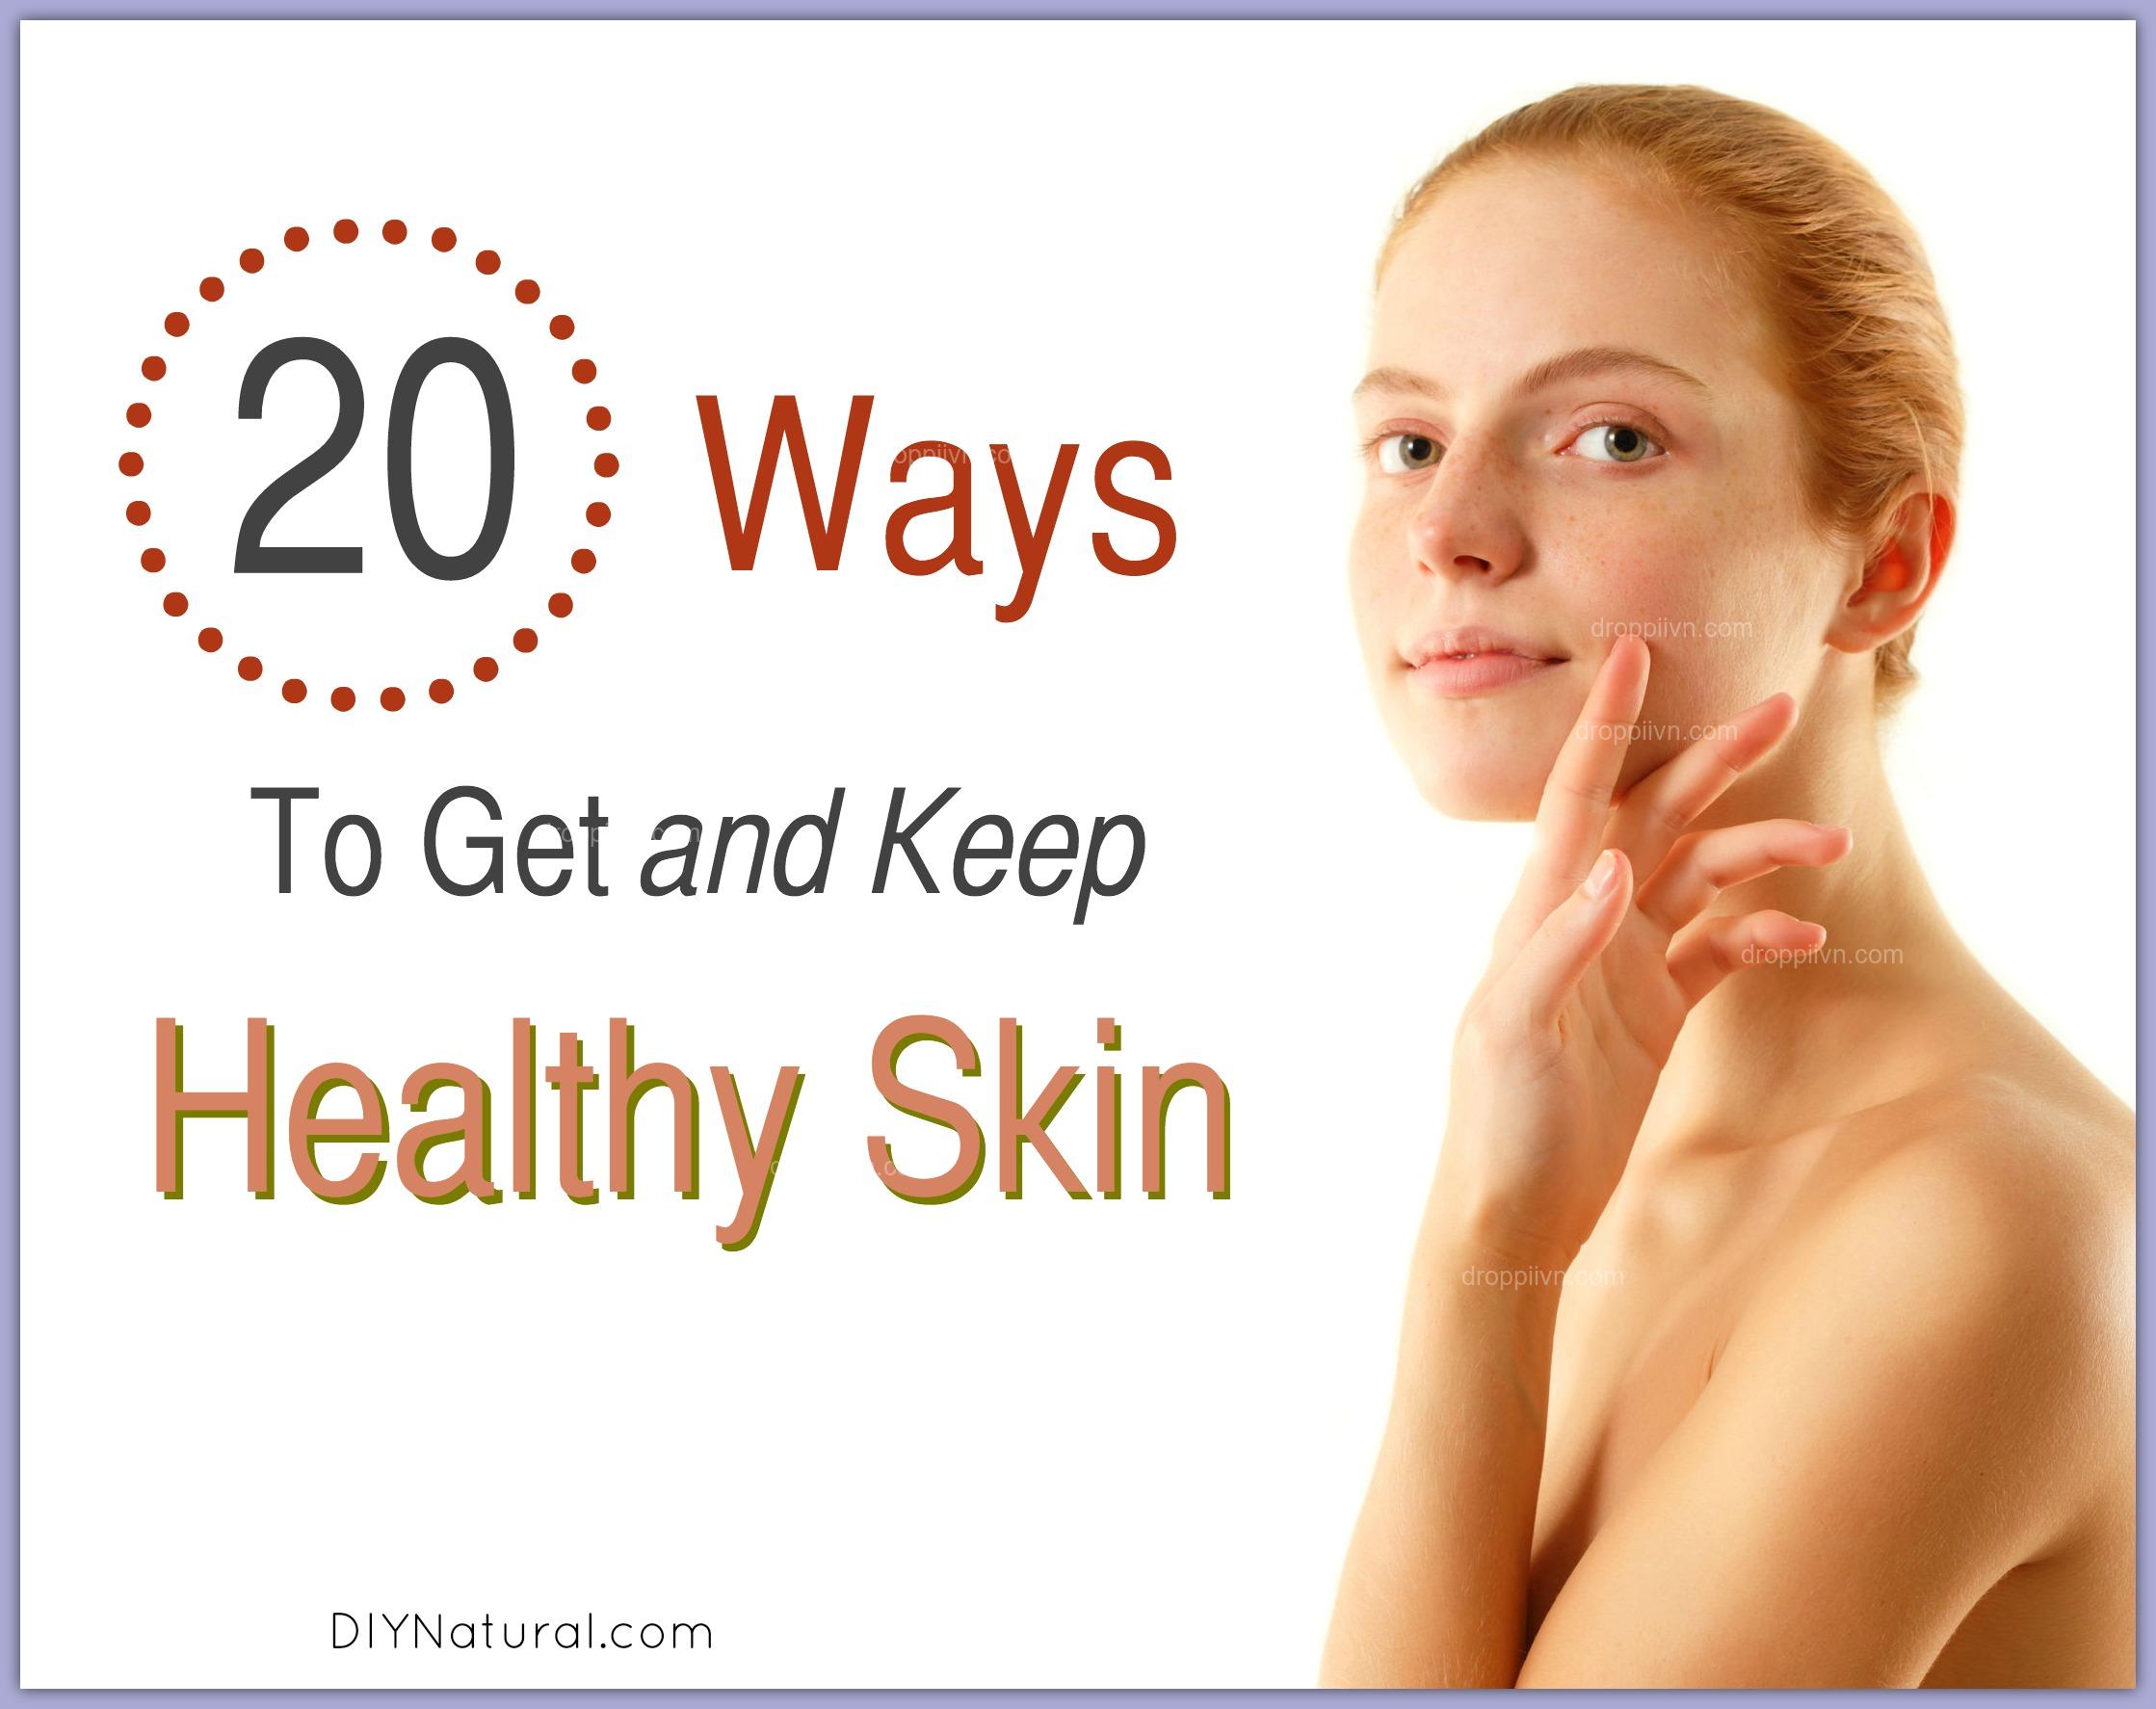 We hope that this blog post will help you achieve clear and healthy skin!